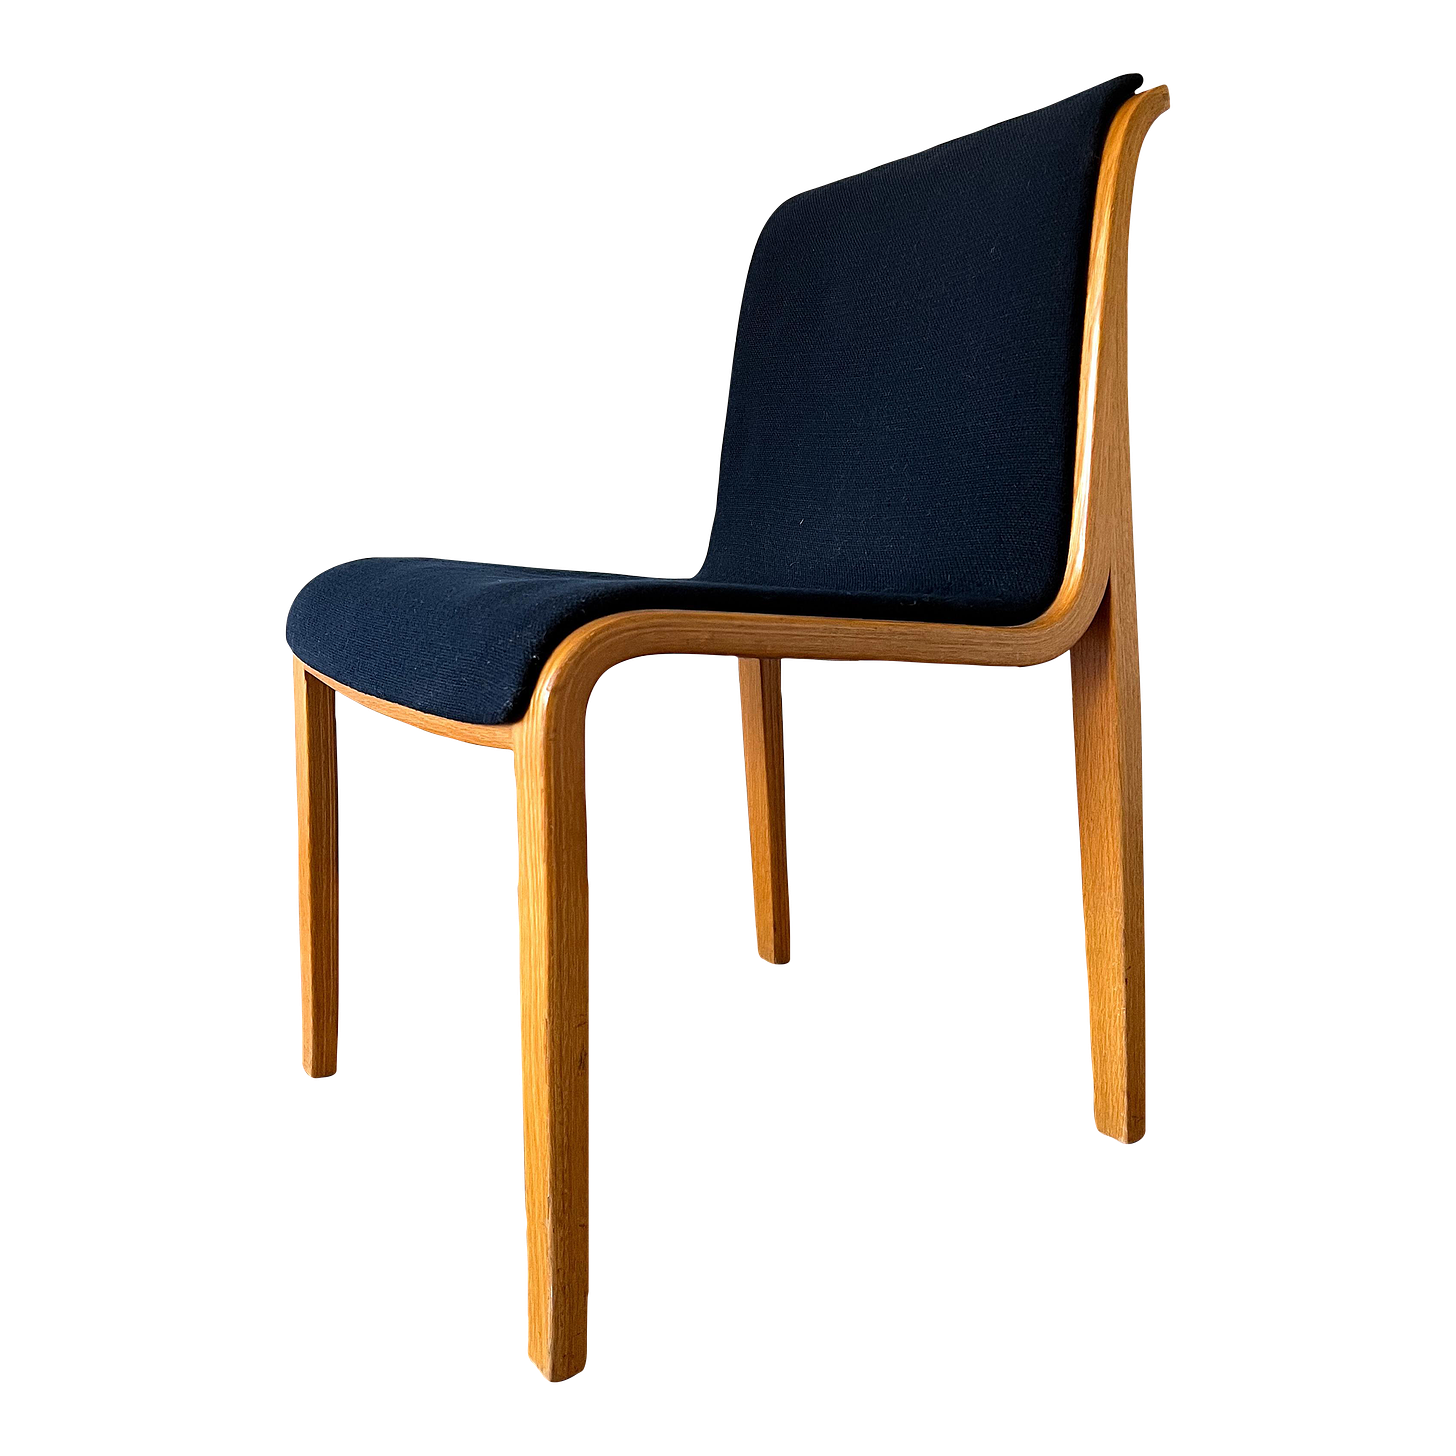 Mid 20th Century Bill Stephens Bentwood Dining Chair for Knoll | Chairish